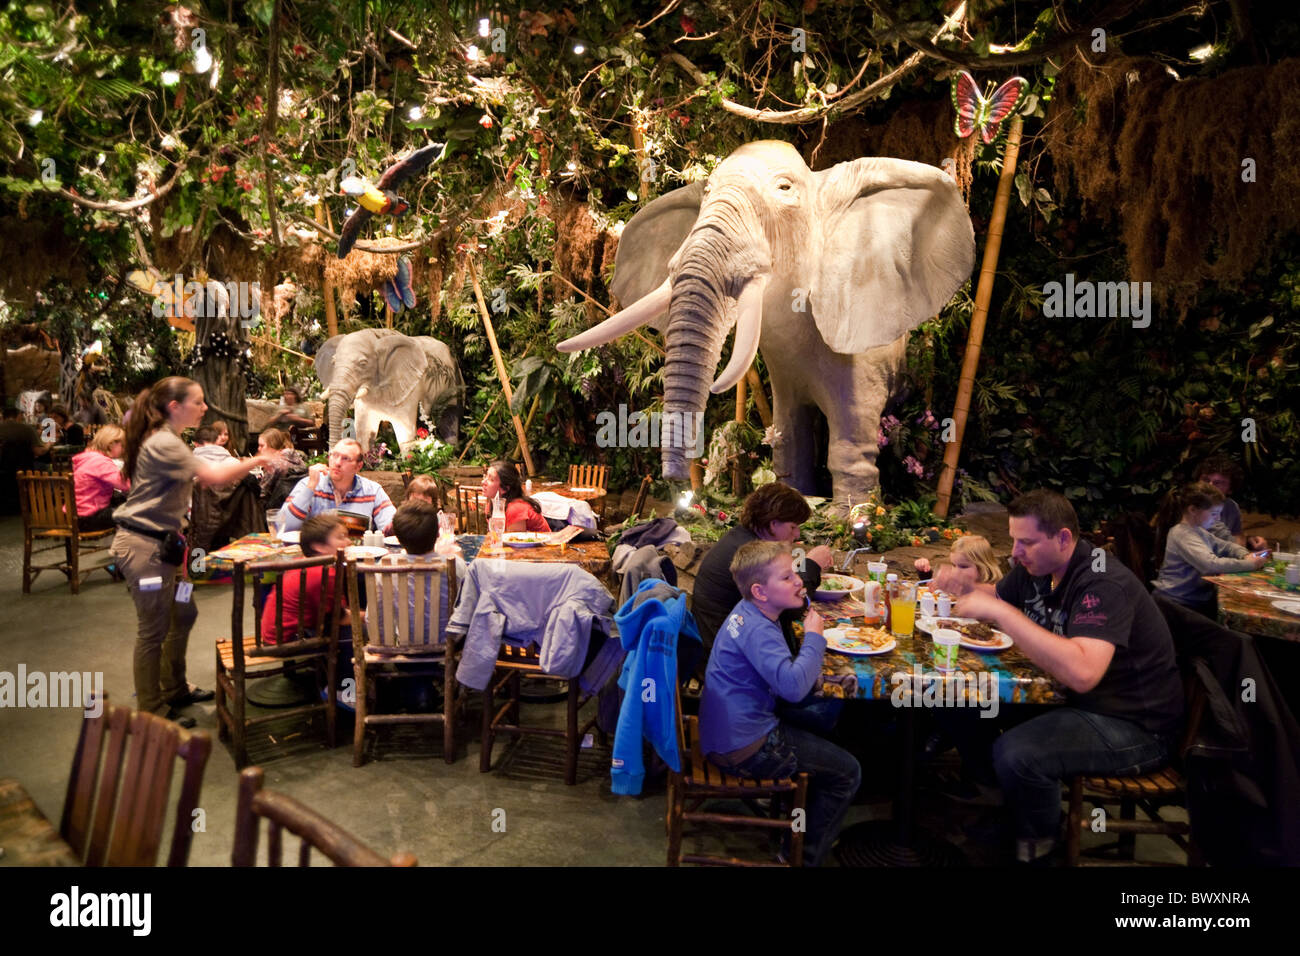 Photos at Rainforest Cafe - 53 tips from 3690 visitors